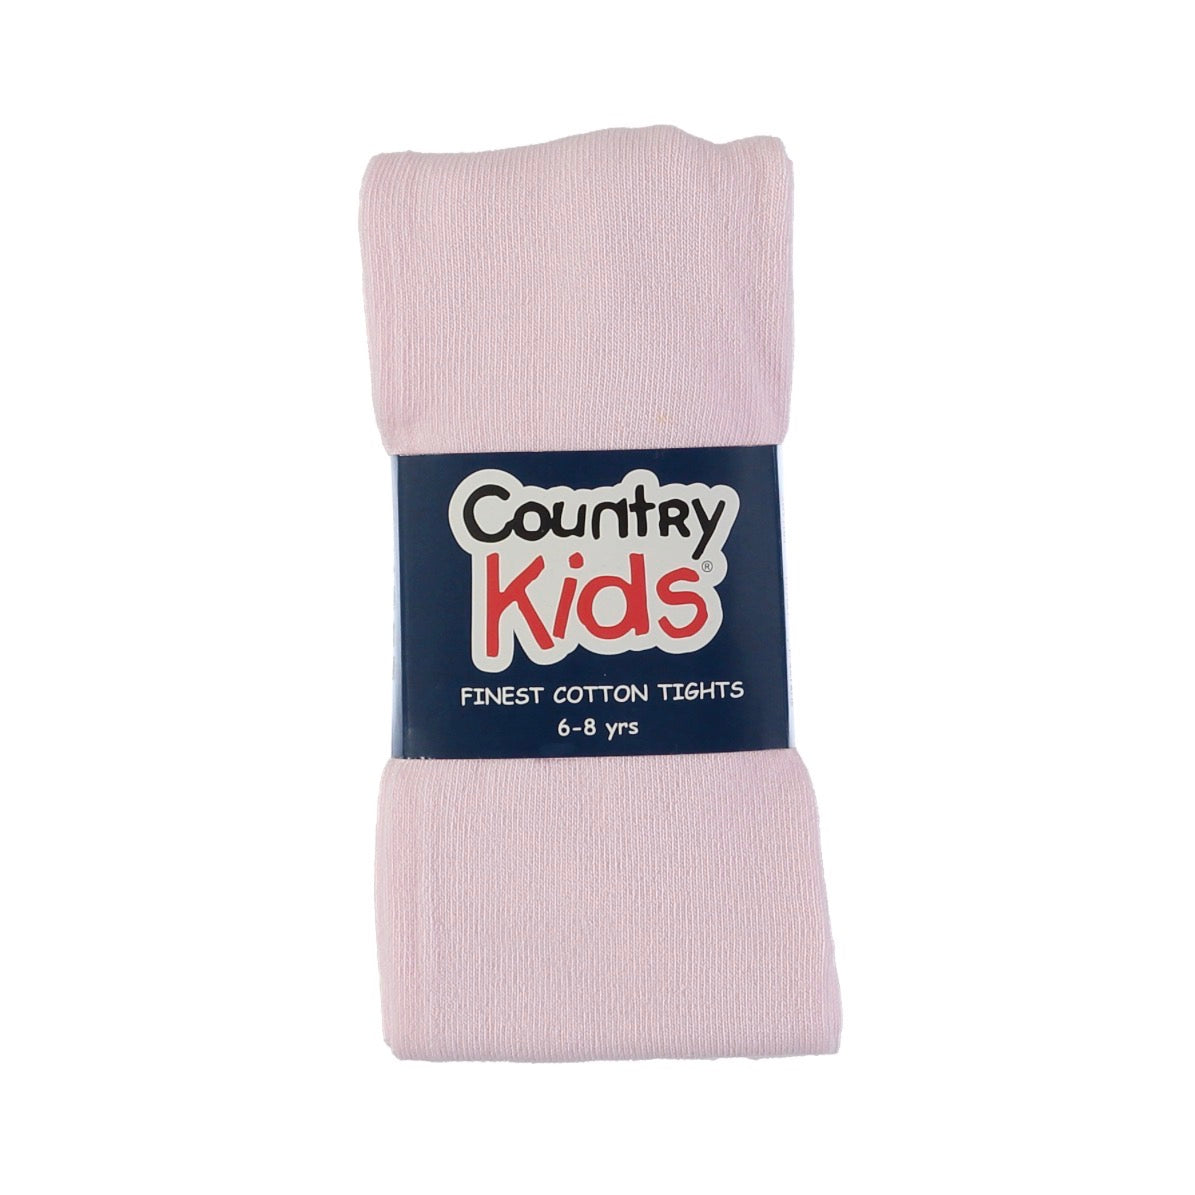 Country Kids Plain Tights Pale Pink Clothing 1-3YRS / Pale Pink,3-5YRS / Pale Pink,6-8YRS / Pale Pink